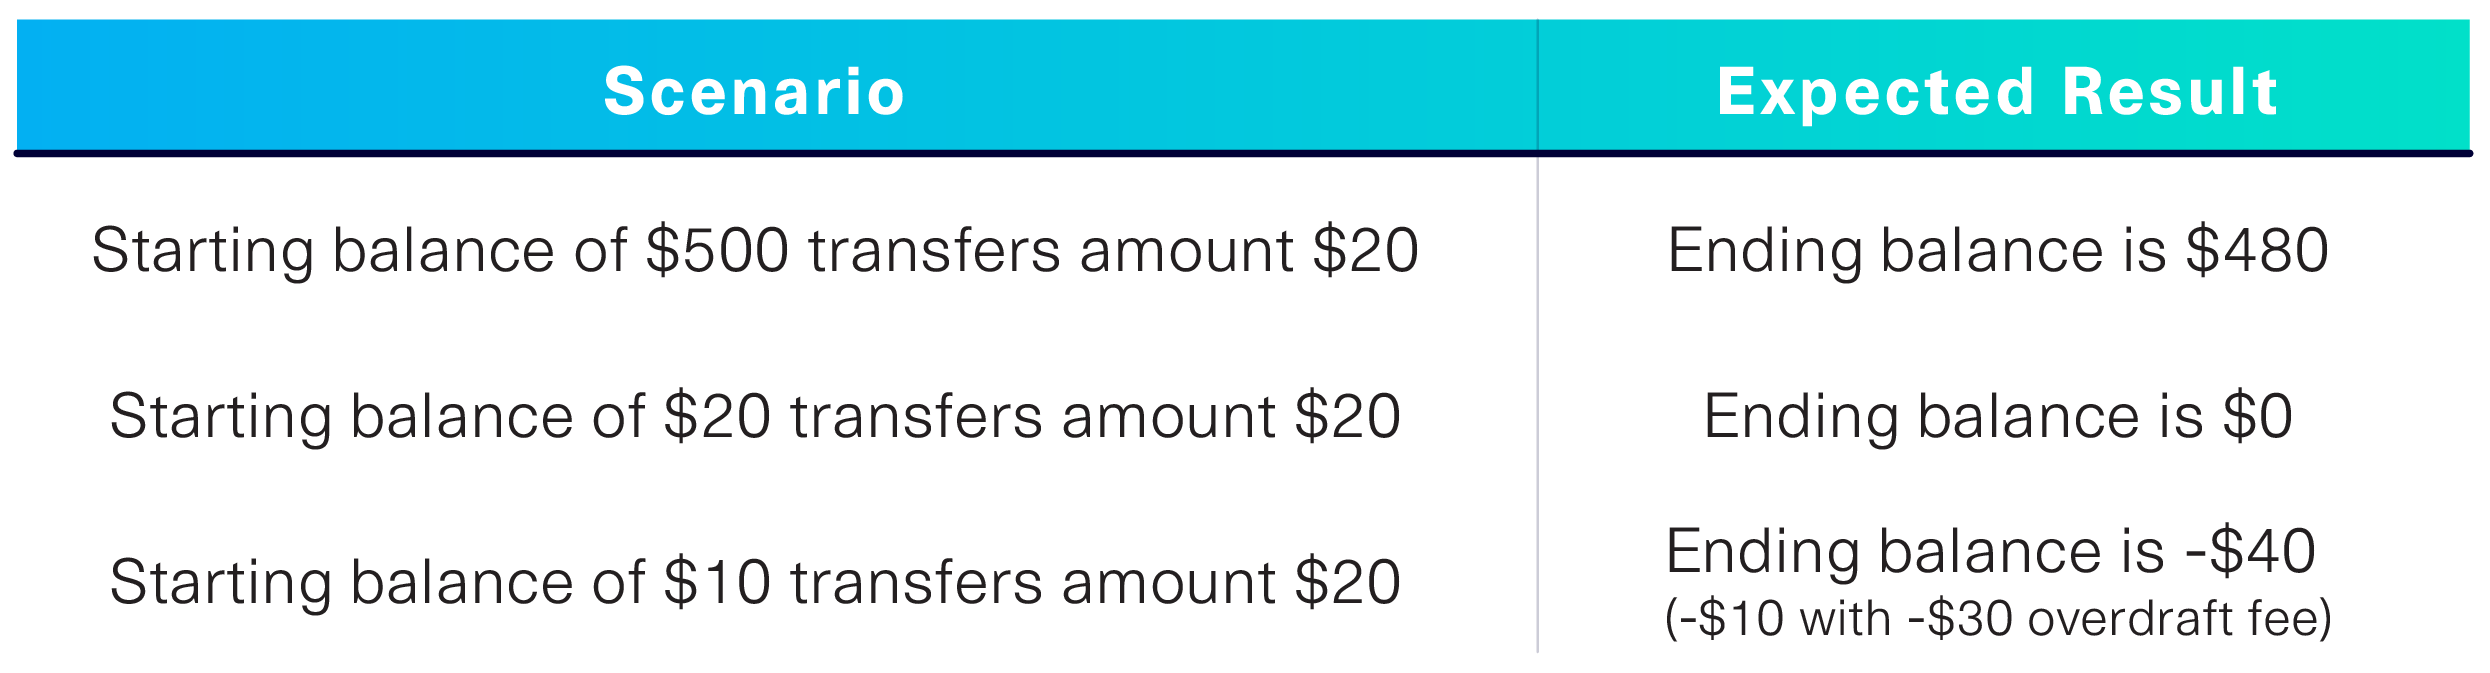 This table shows a few scenarios you may use to test your system. In these scenarios, you're testing how a monetary transfer of $20 changes the balance in different accounts.